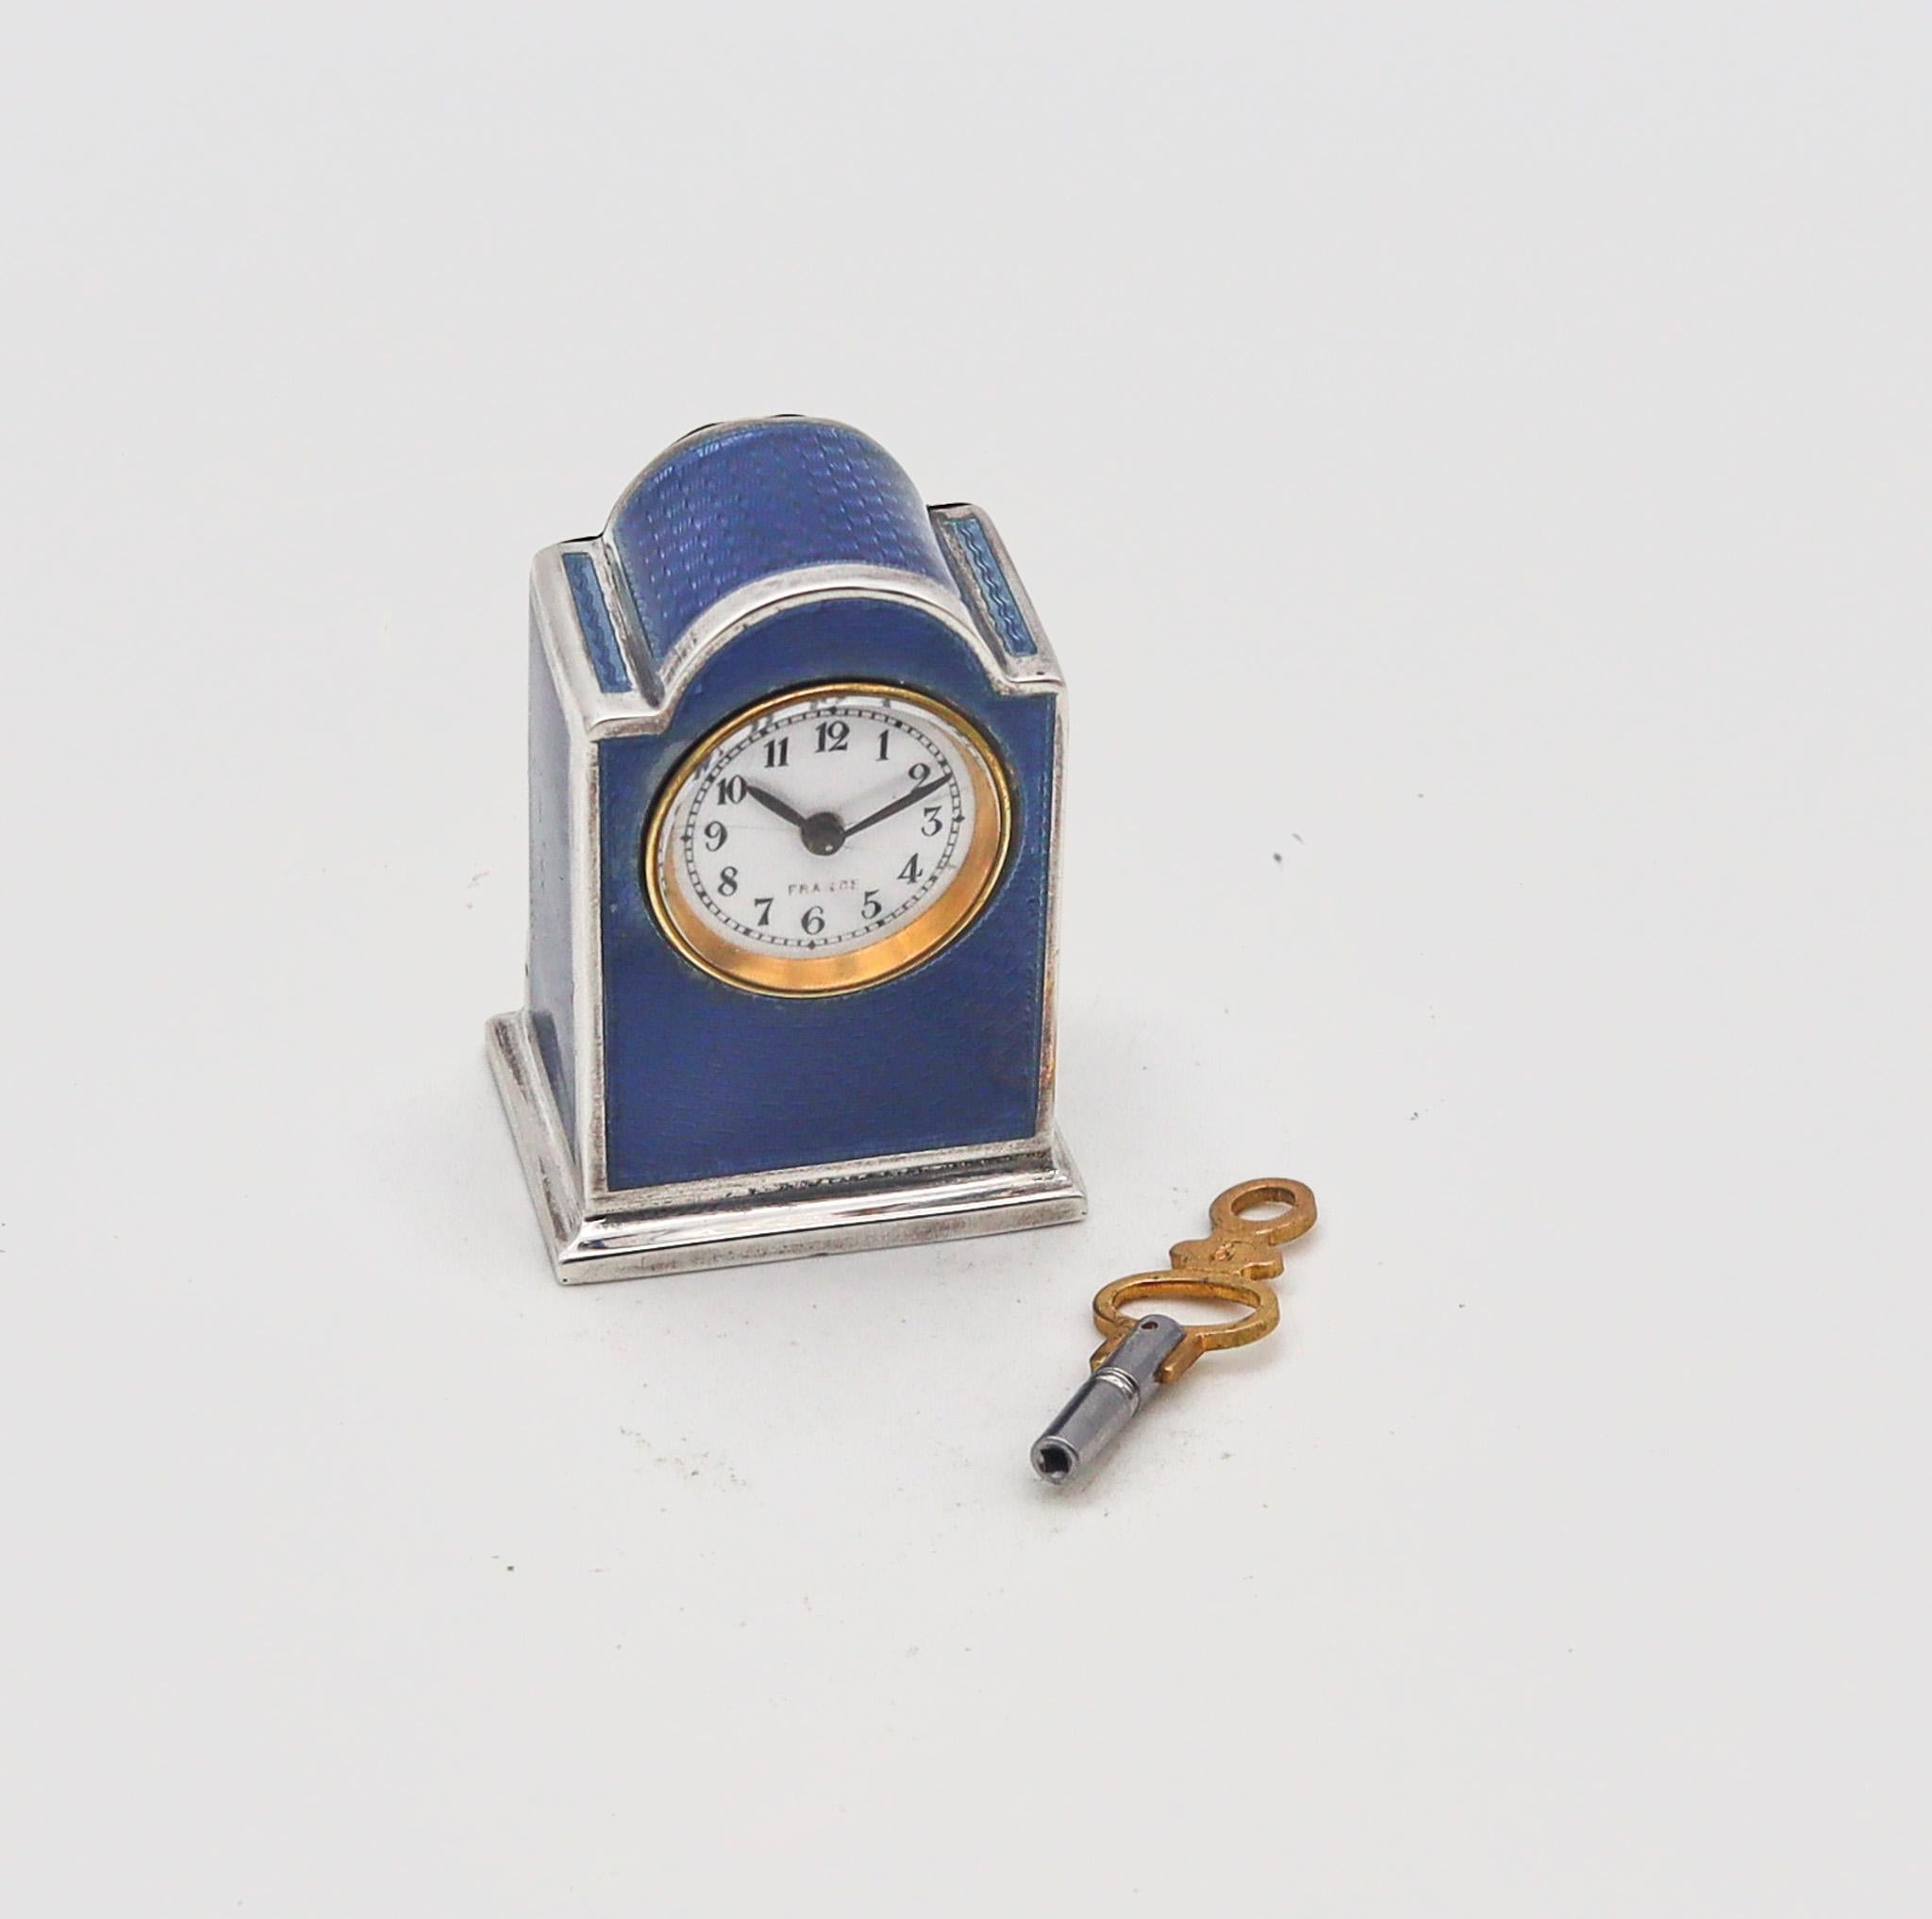 A miniature travel clock designed by R. Vachet Paris.

Exceptional and very rare miniature travel-carriage clock, made in Paris France at the atelier of R. Vachet. This fabulous little antique clock was crafted during the late Edwardian period, back